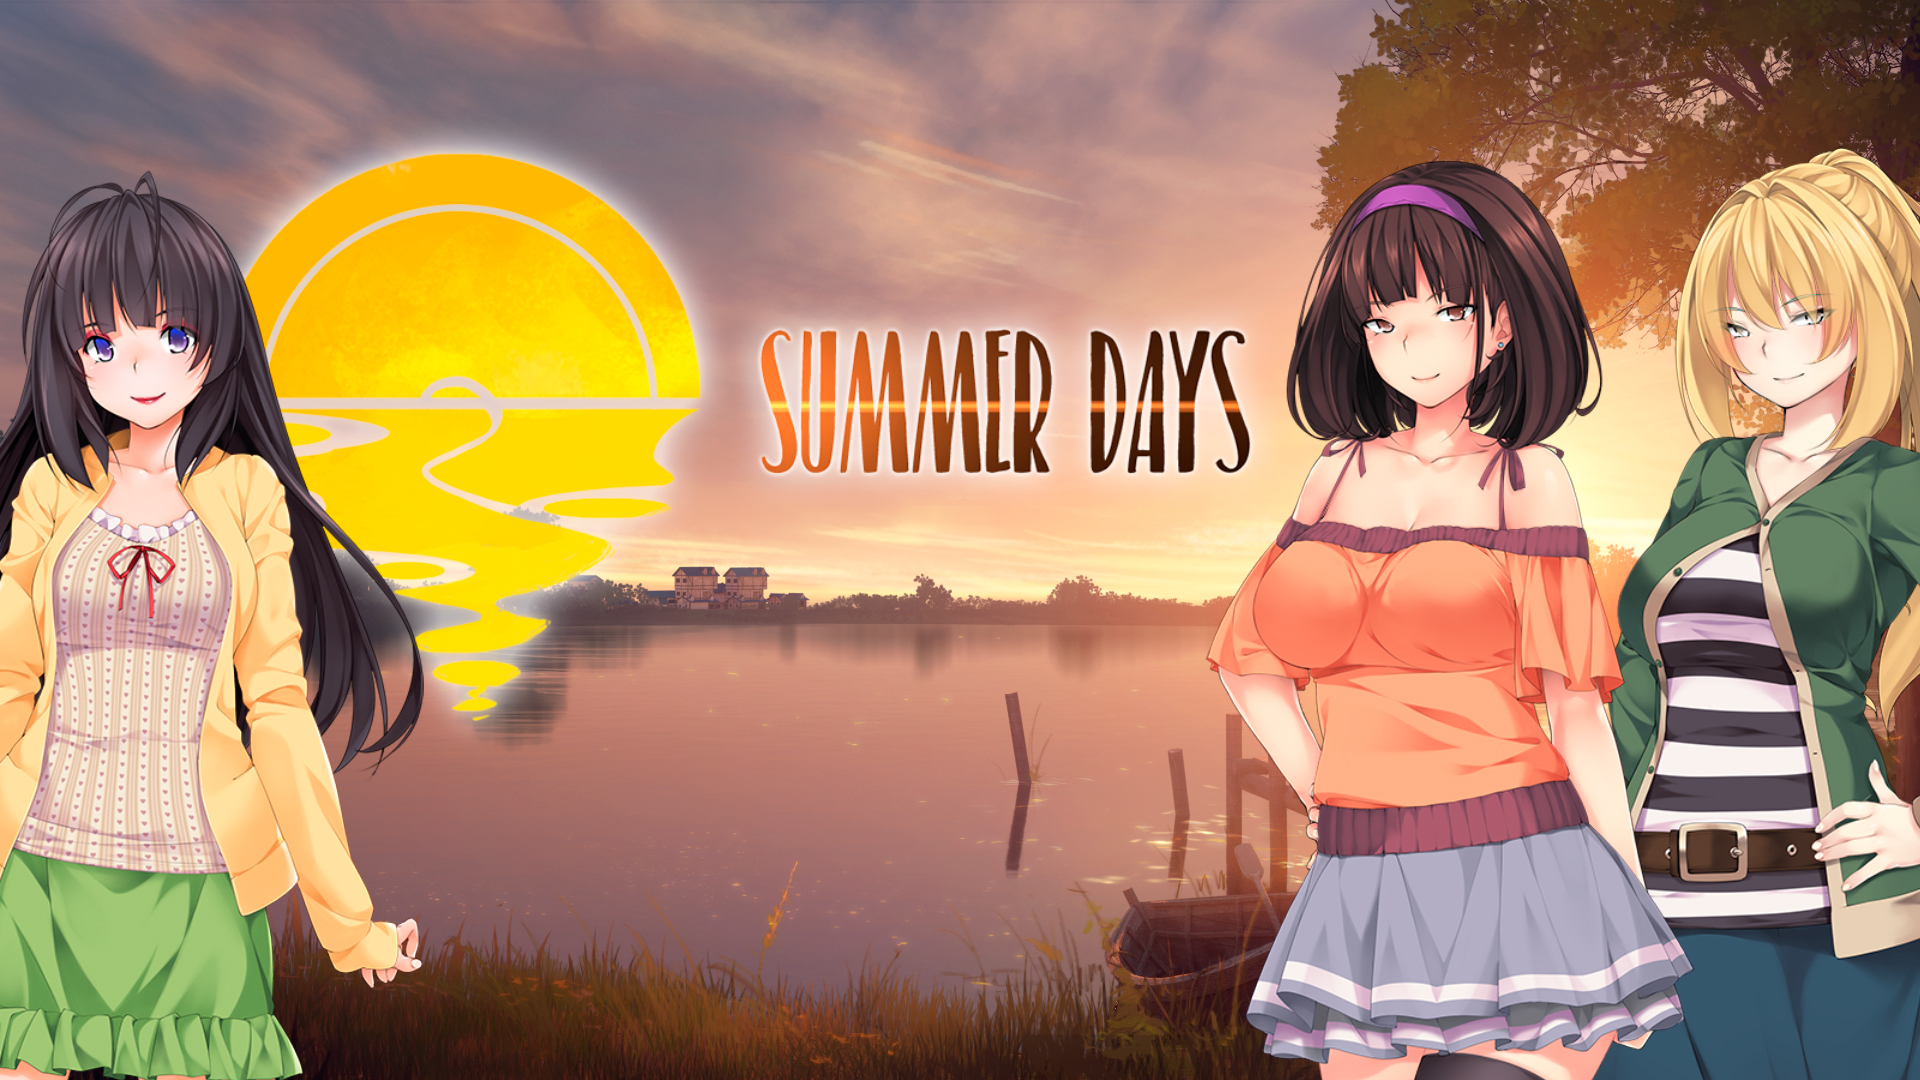 Summer Days игра. Wet Summer Days игра. Summer Day. Summer Days Таня. This is summer day